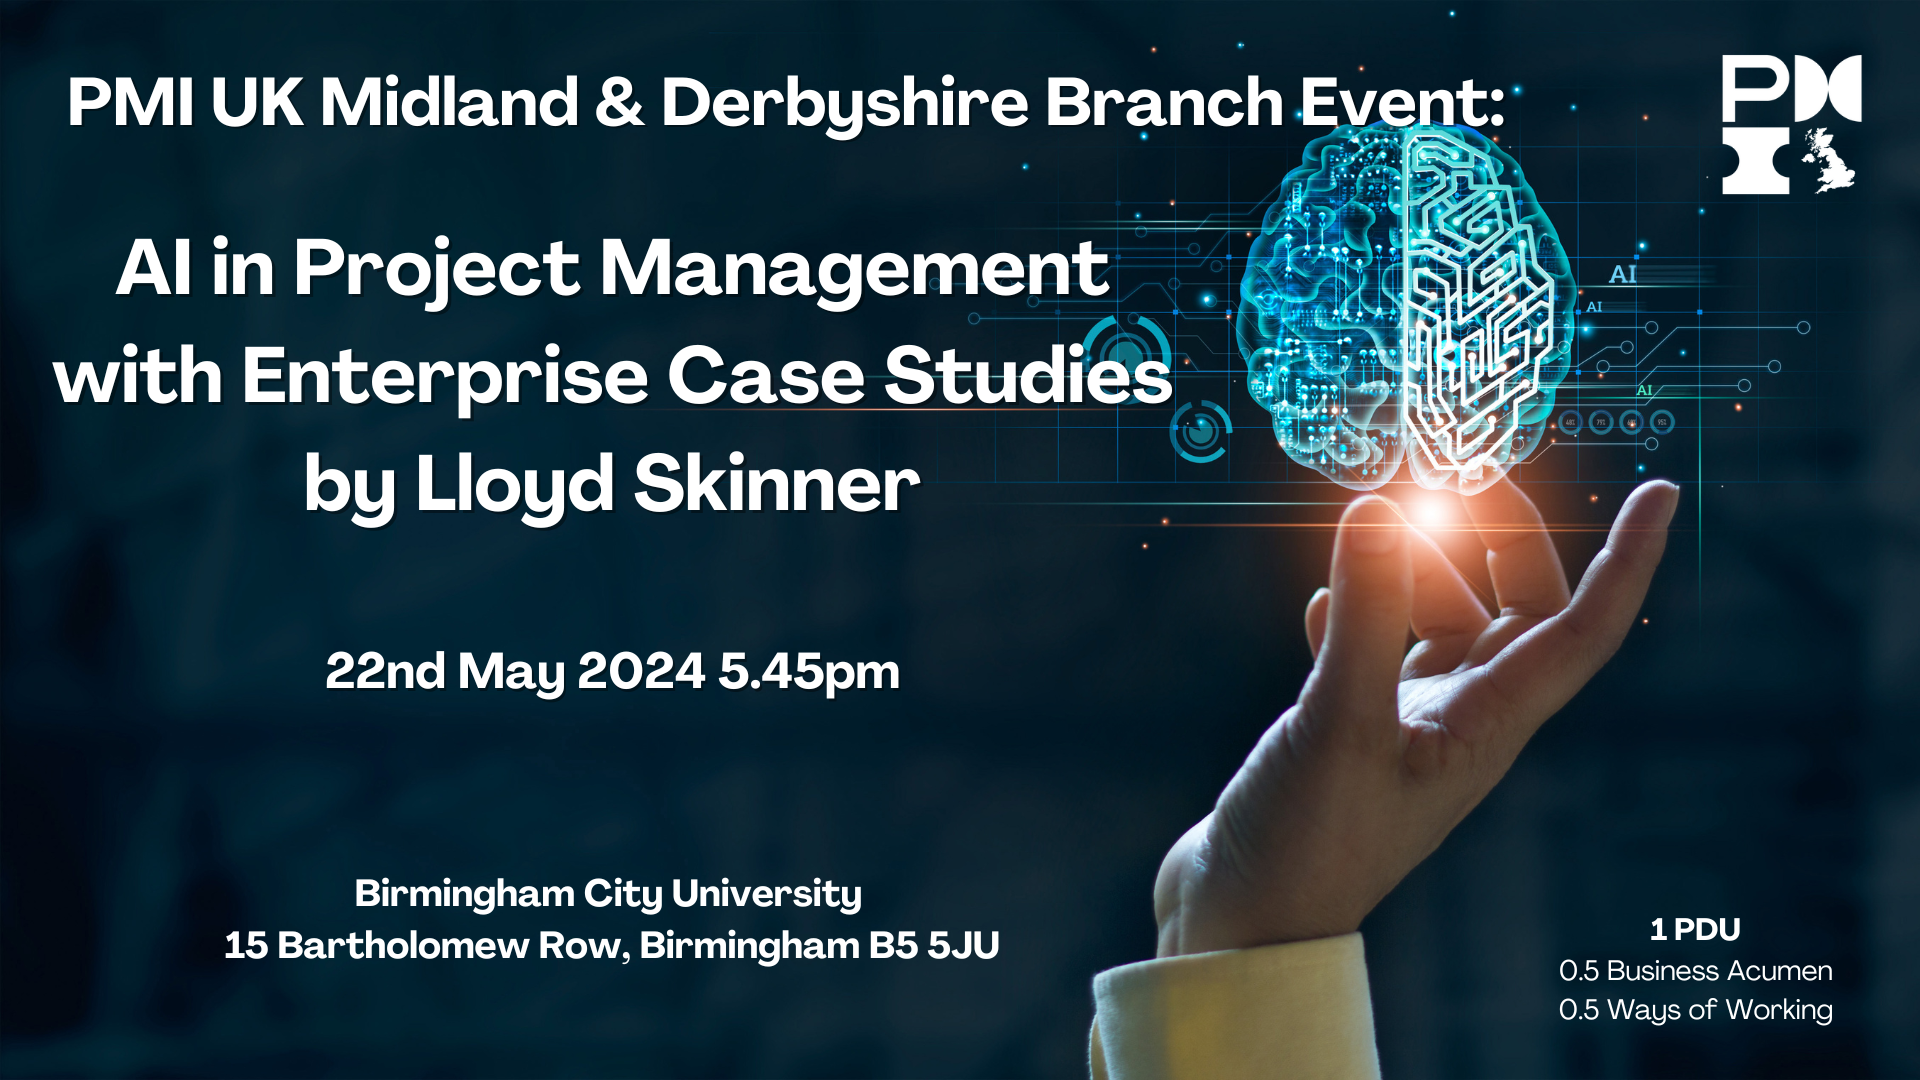 PMI UK Midland & Derbyshire Branch Event: AI in Project Management with Enterprise Case Studies. 22nd May 2024